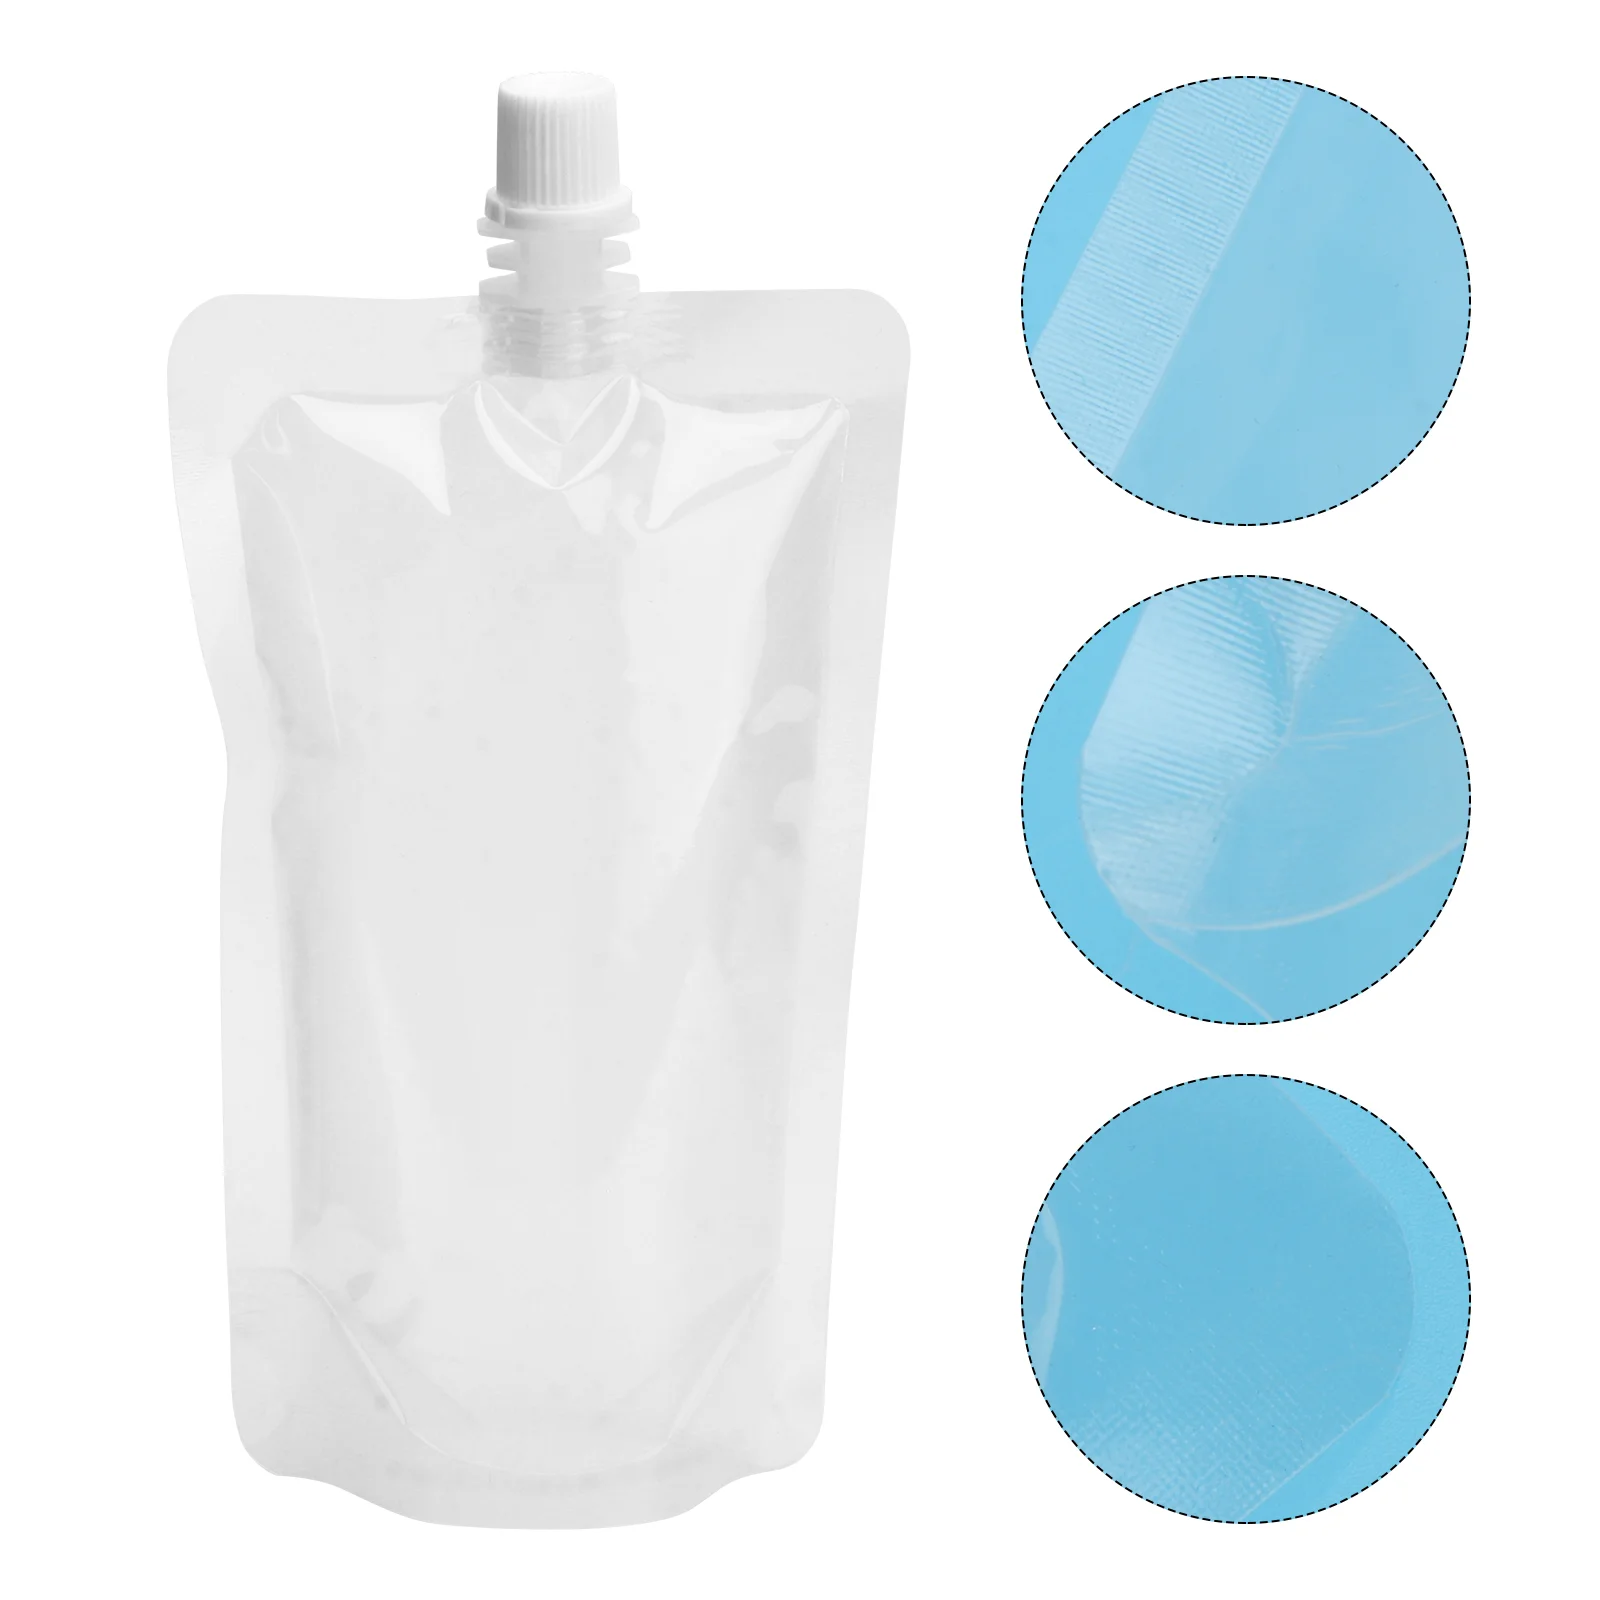 

50pcs 250ml Drinks Flasks Container Take out Beverage Bags Reclosable for Travel Outdoor